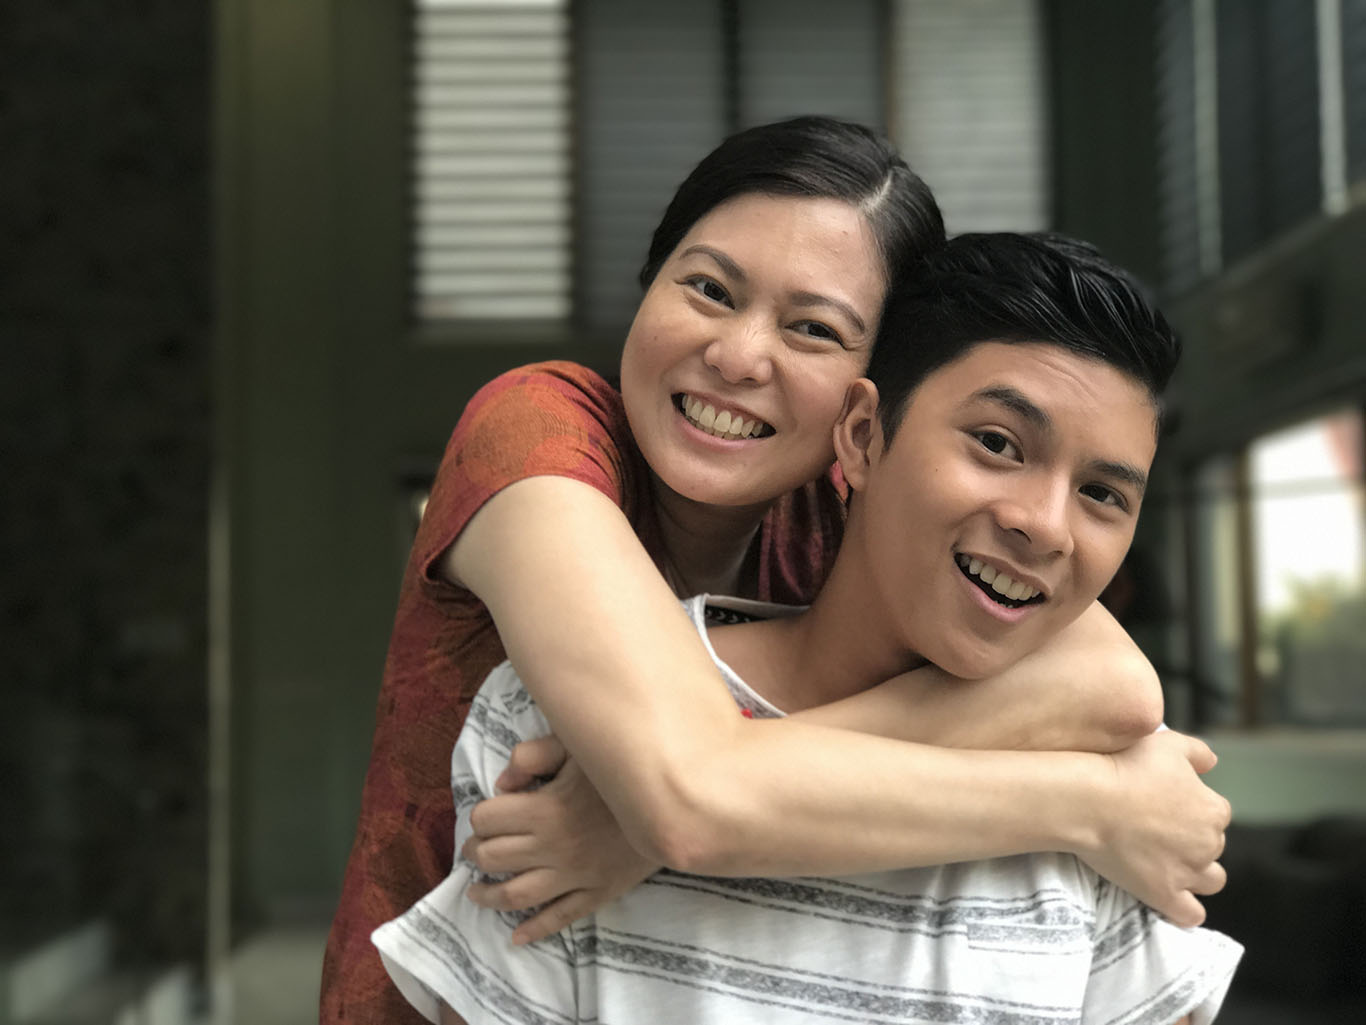 PLDT Home encourages all to #ConnectForReal this Mother’s Day